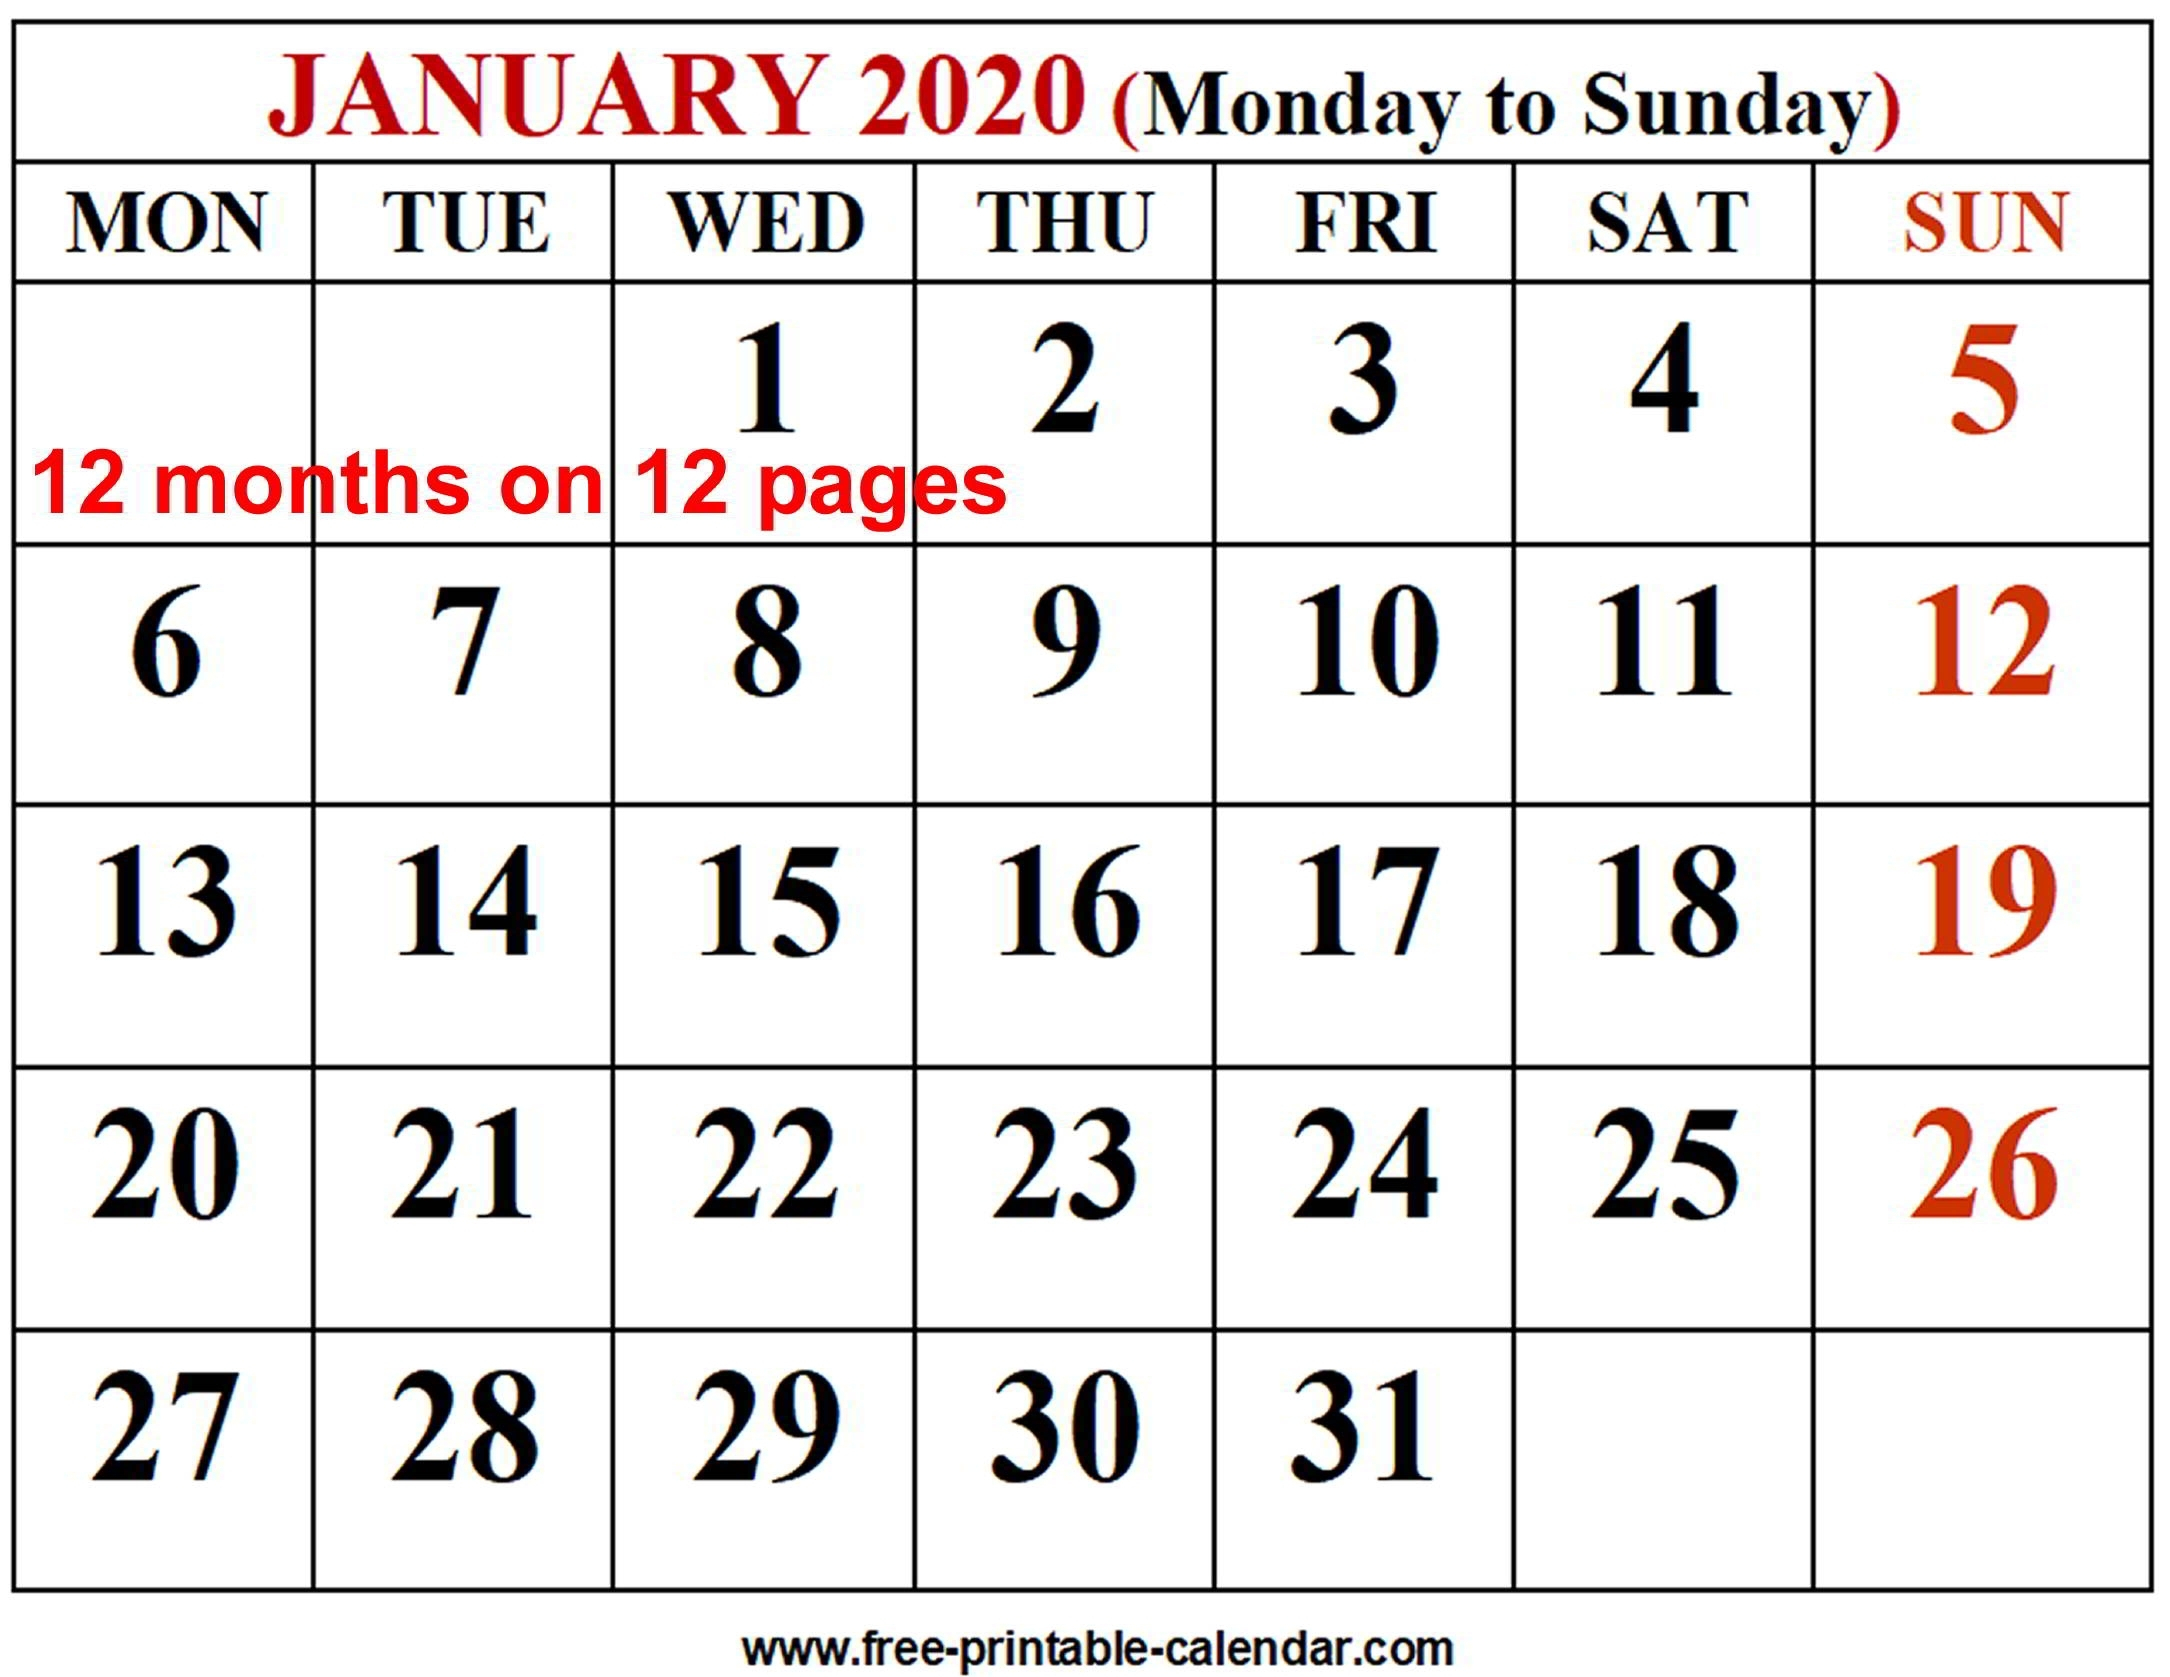 2020 12 Month Monday To Sunday Calendar Template inside Free Printable Calendars-Yearly-Denoting Weeks Within Month